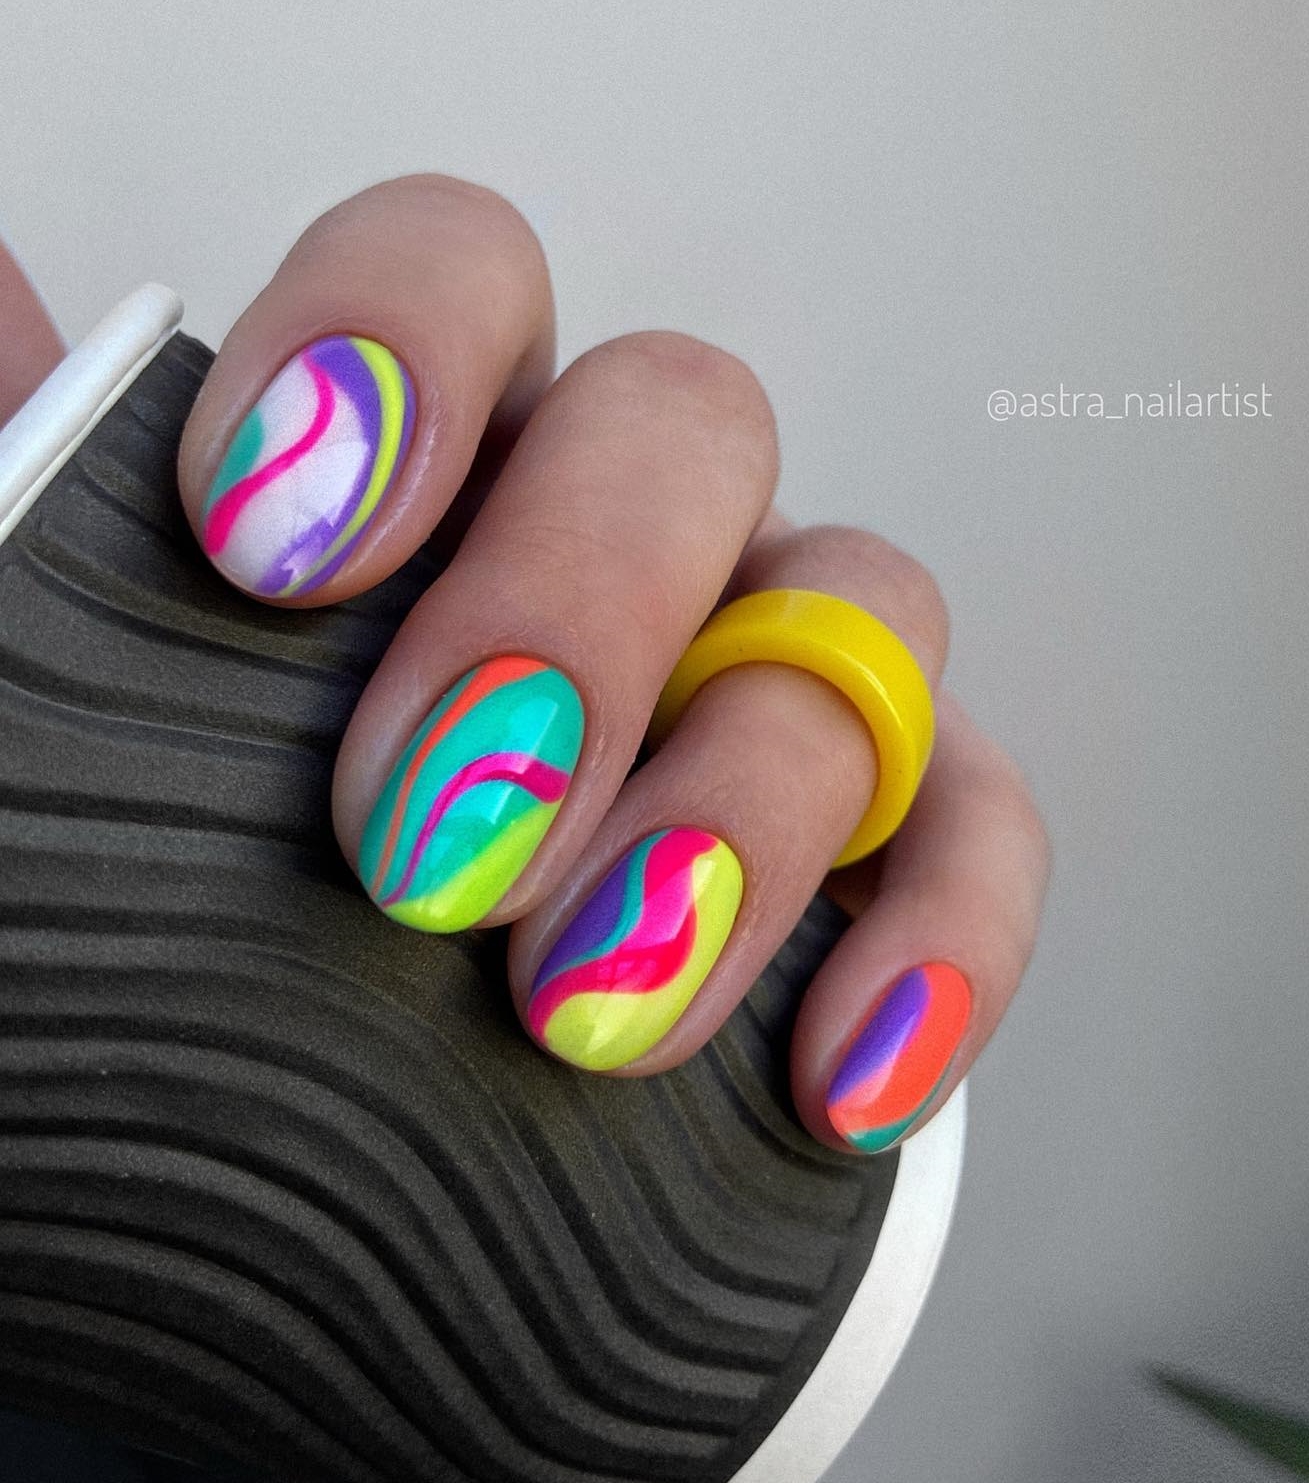 Bright Colorful Nails with Swirls